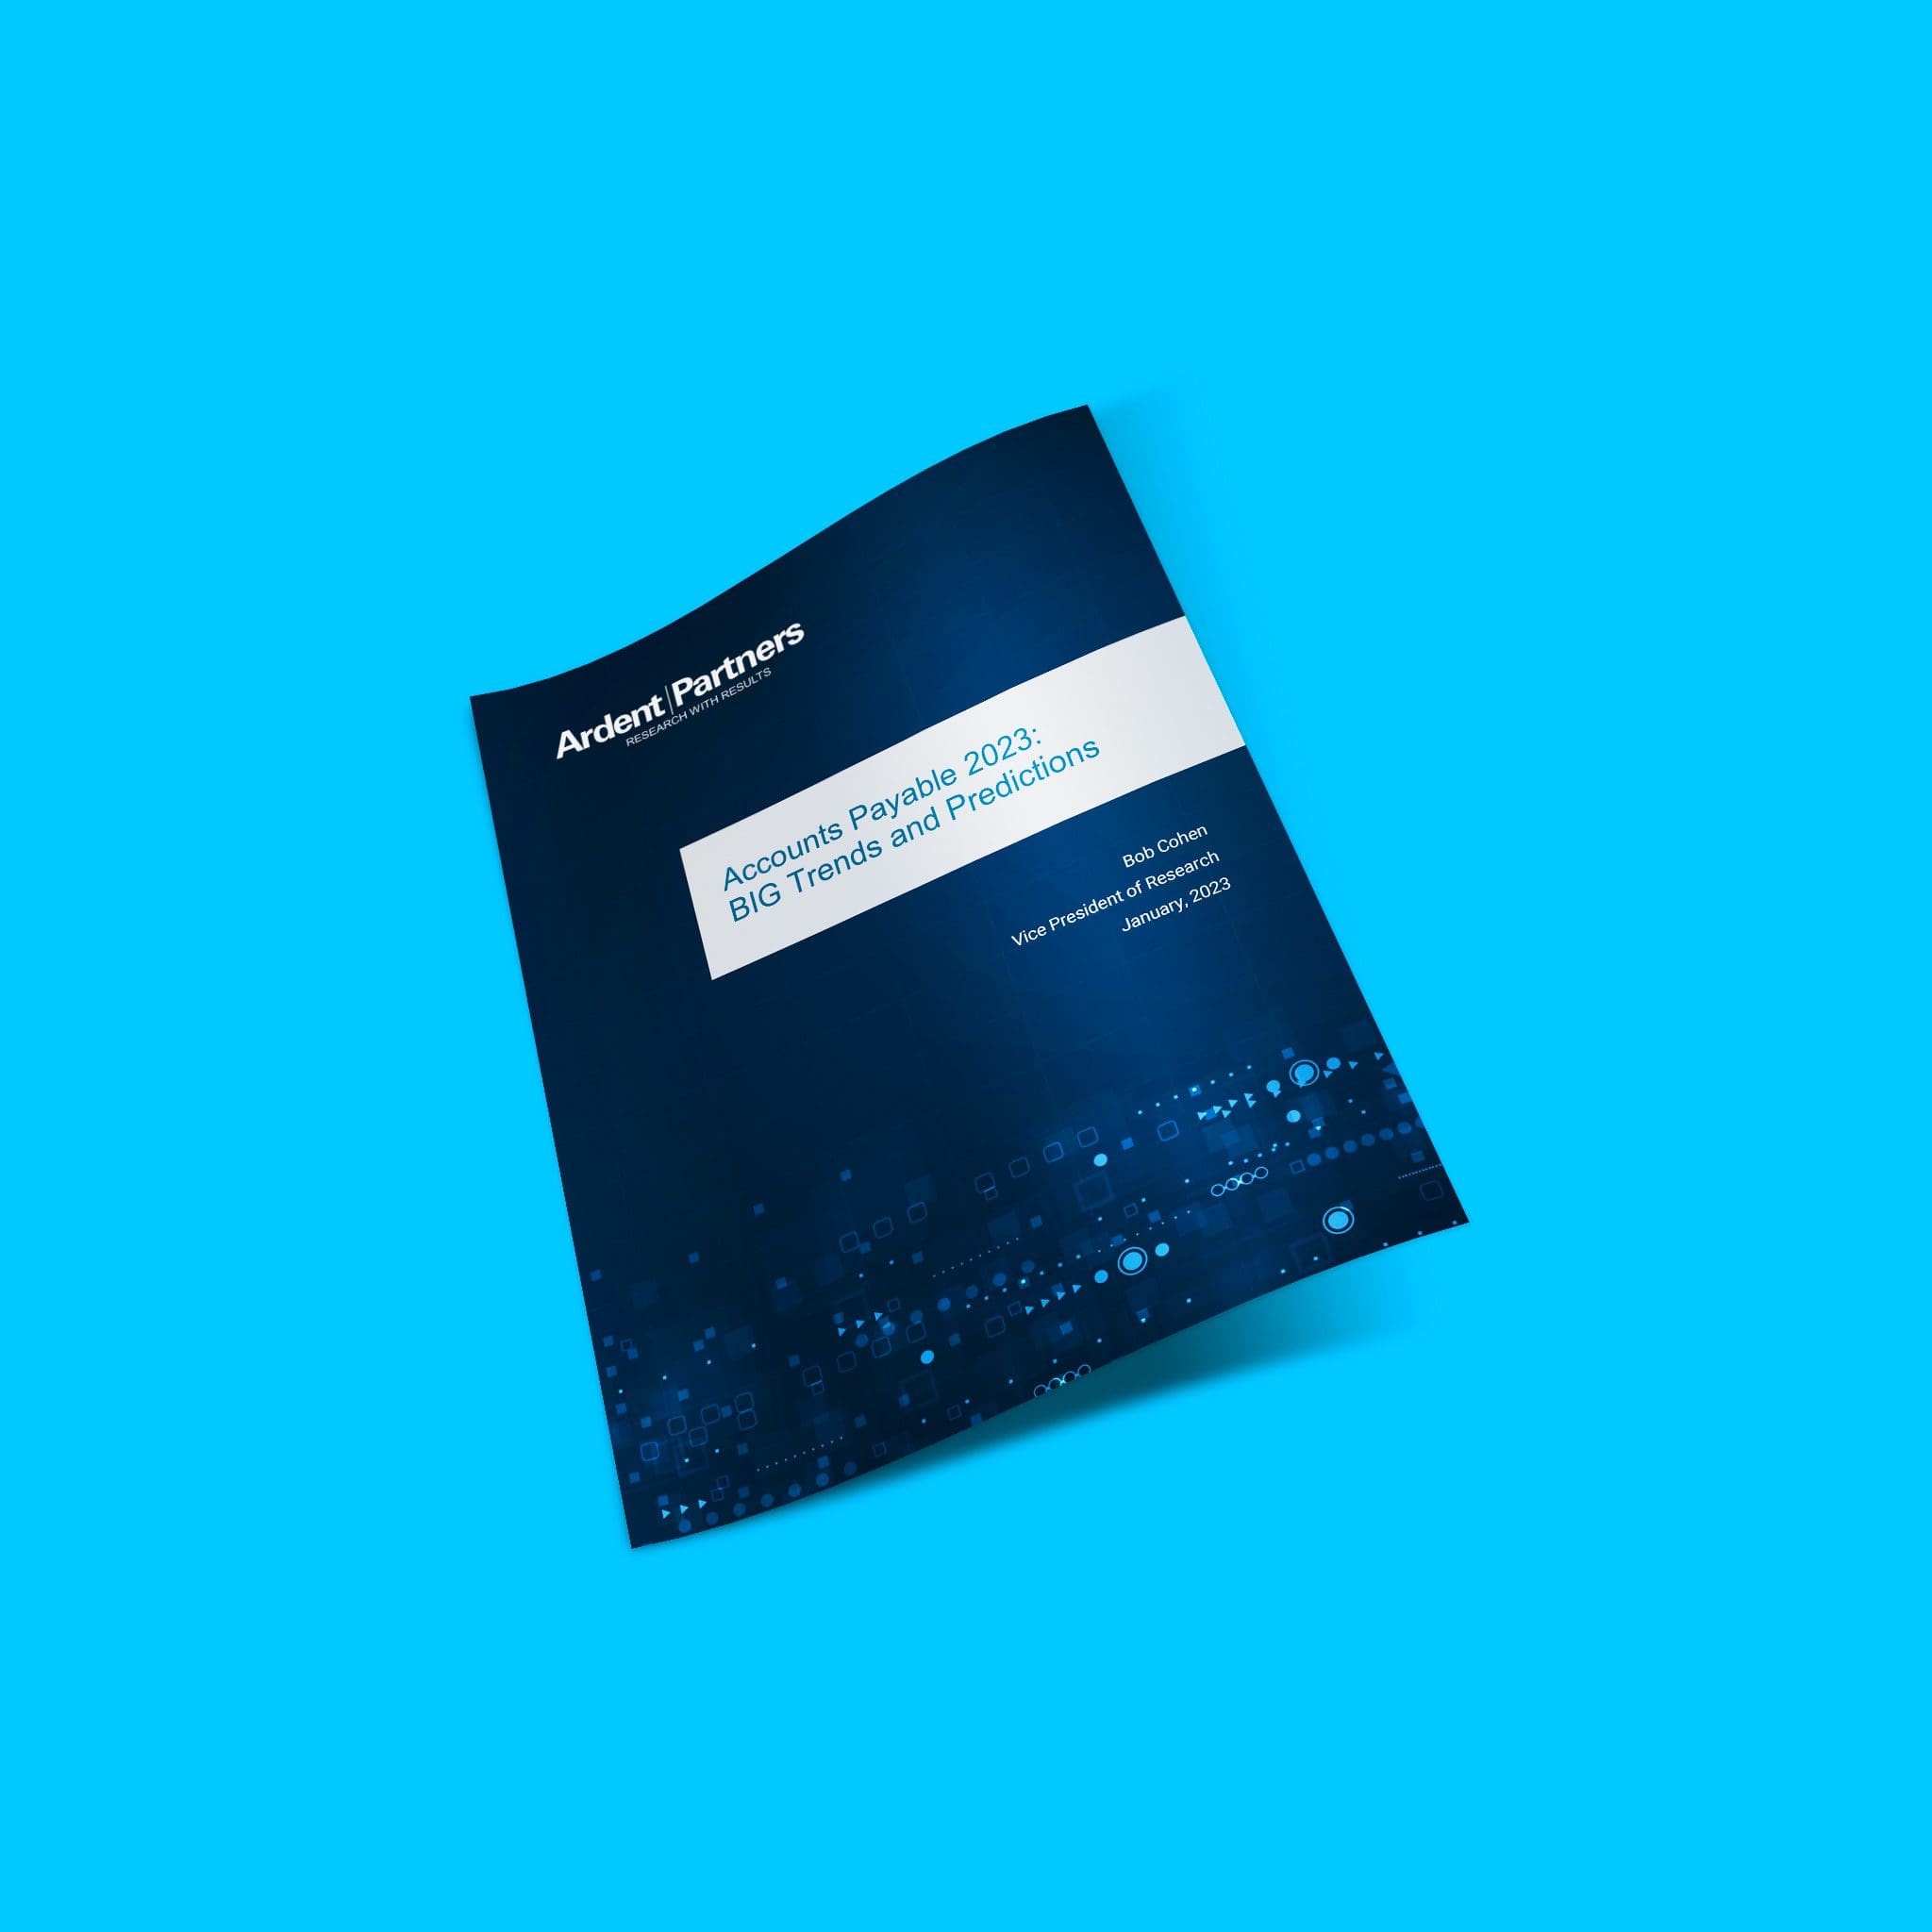 Physical copy of Ardent Partners report on 2023 Accounts Payable trends and predictions.